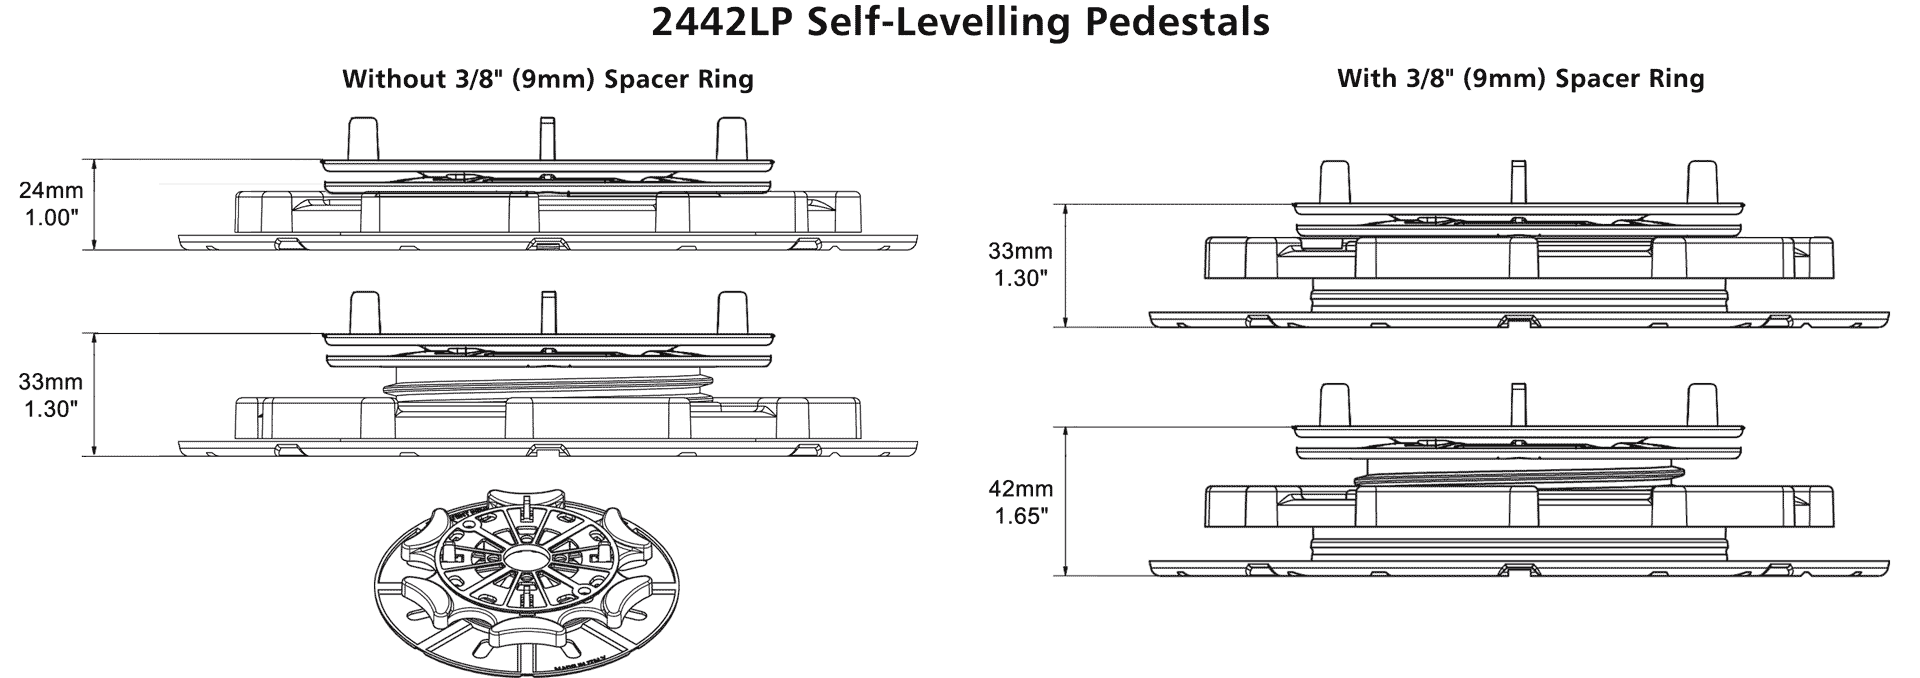 StrataRise 2442 Self Levelling Low Profile Pedestals - Technical Drawings